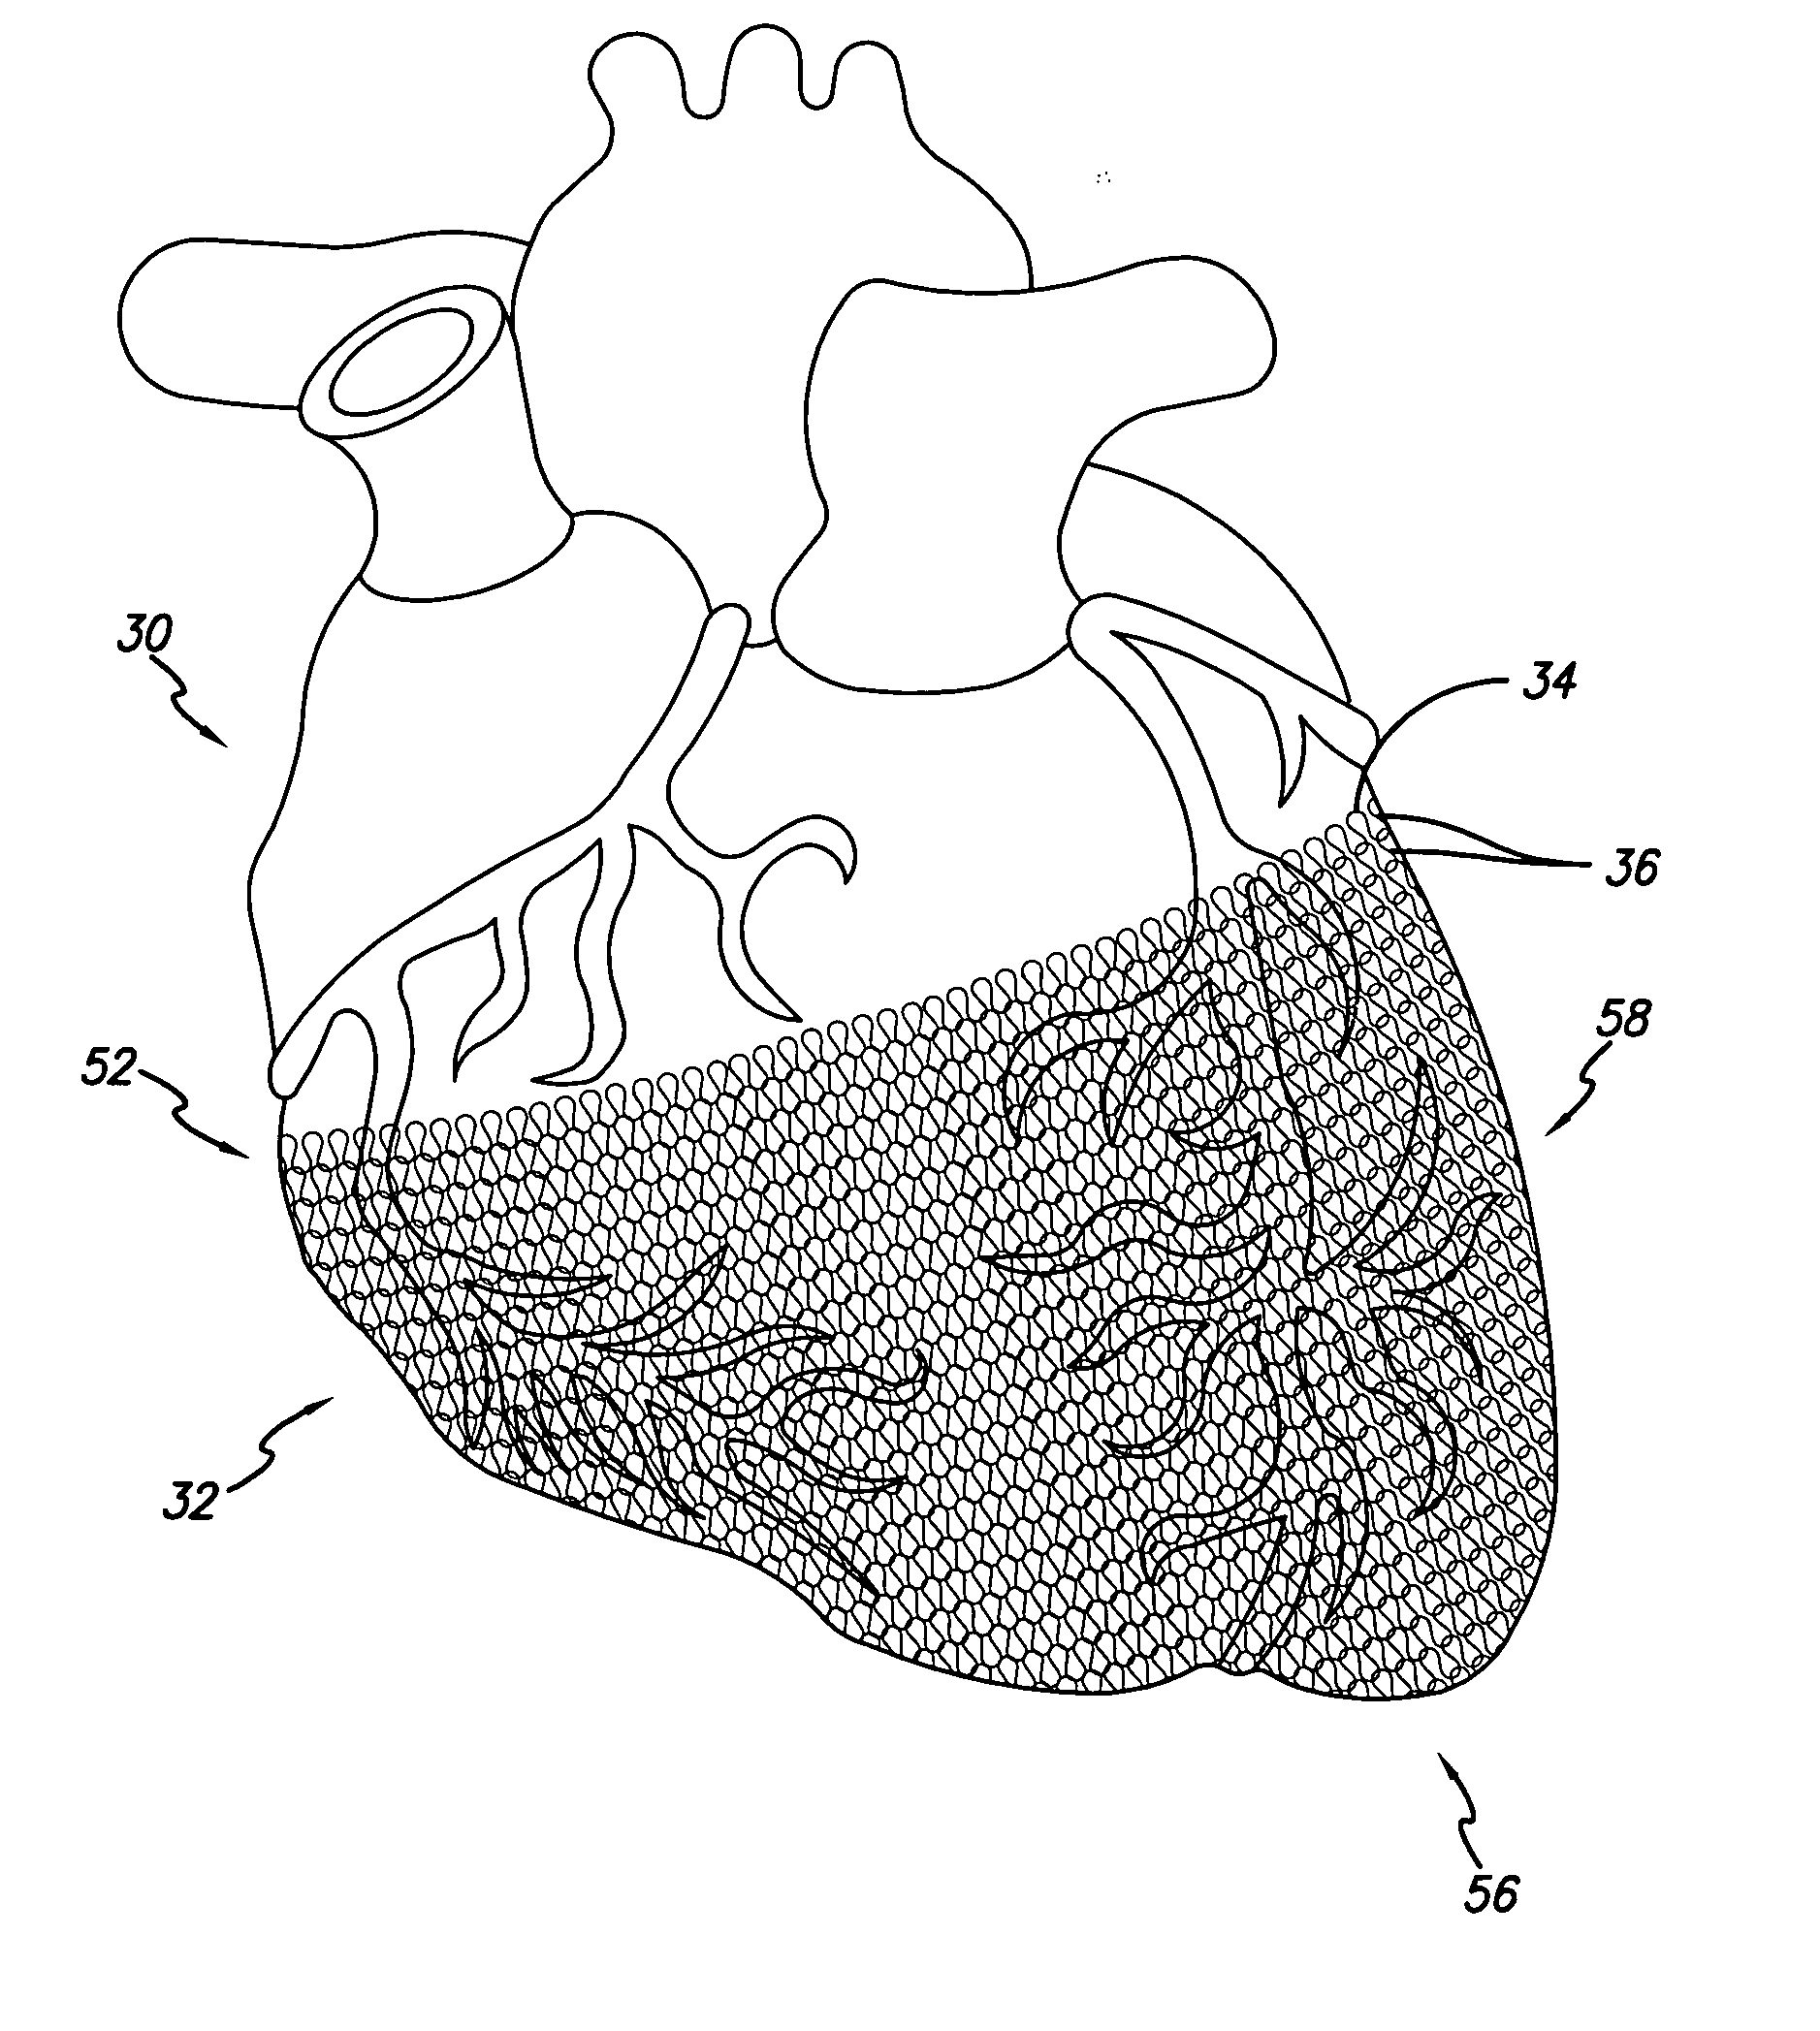 Apparatus and method of delivering biomaterial to the heart